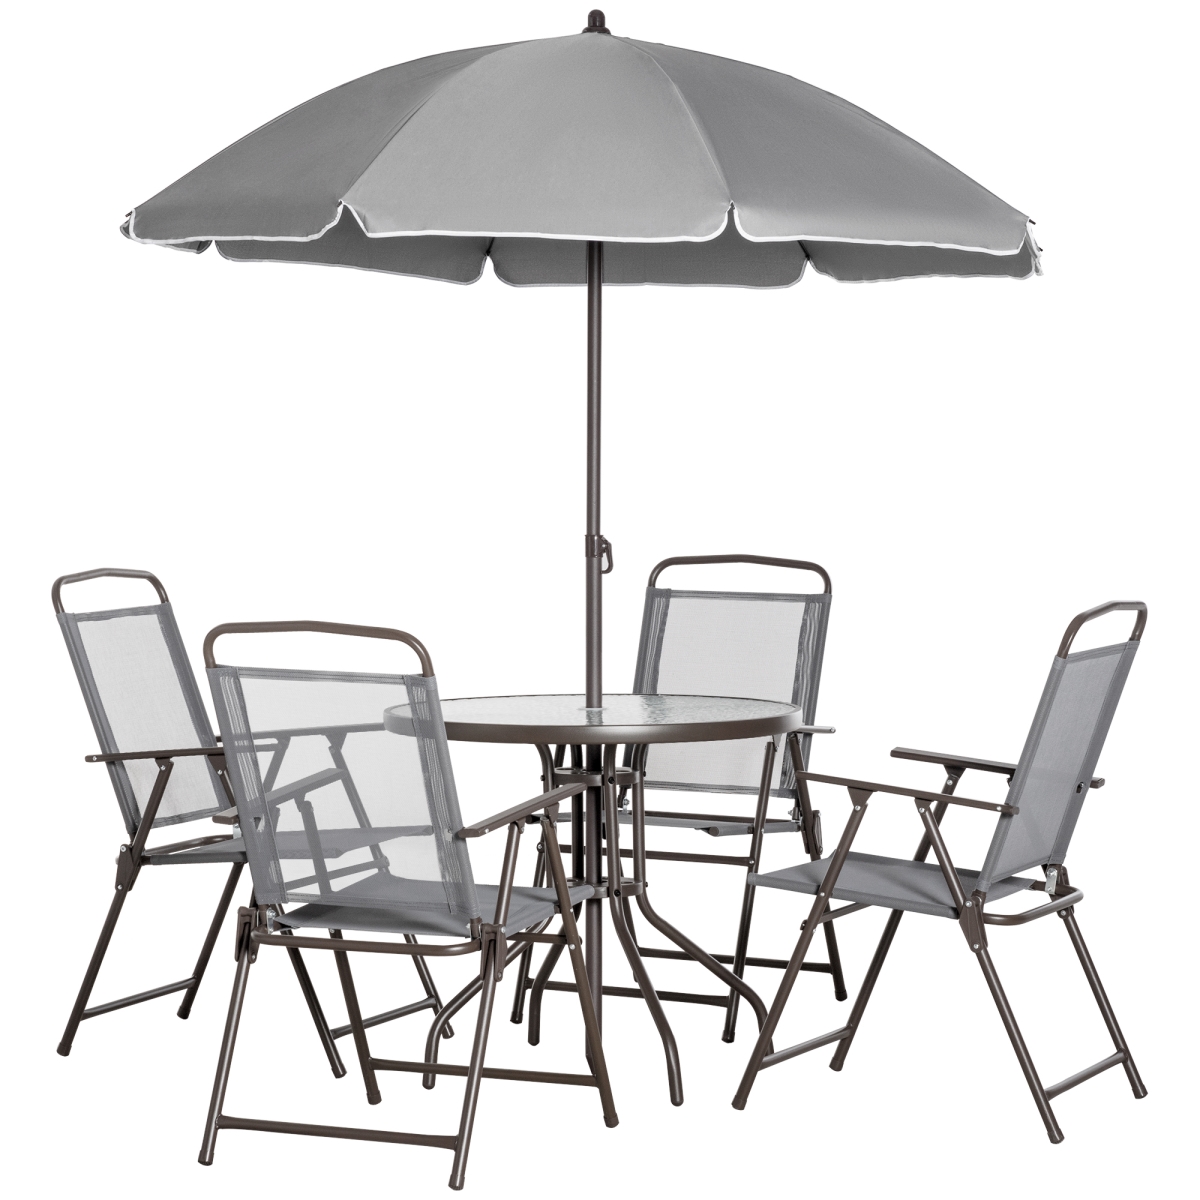 Picture of 212 Main 84B-688 Outsunny Patio Dining Set for 4 with Umbrella with 4 Folding Dining Chairs & Round Glass Table for Garden&#44; Gray - 6 Piece